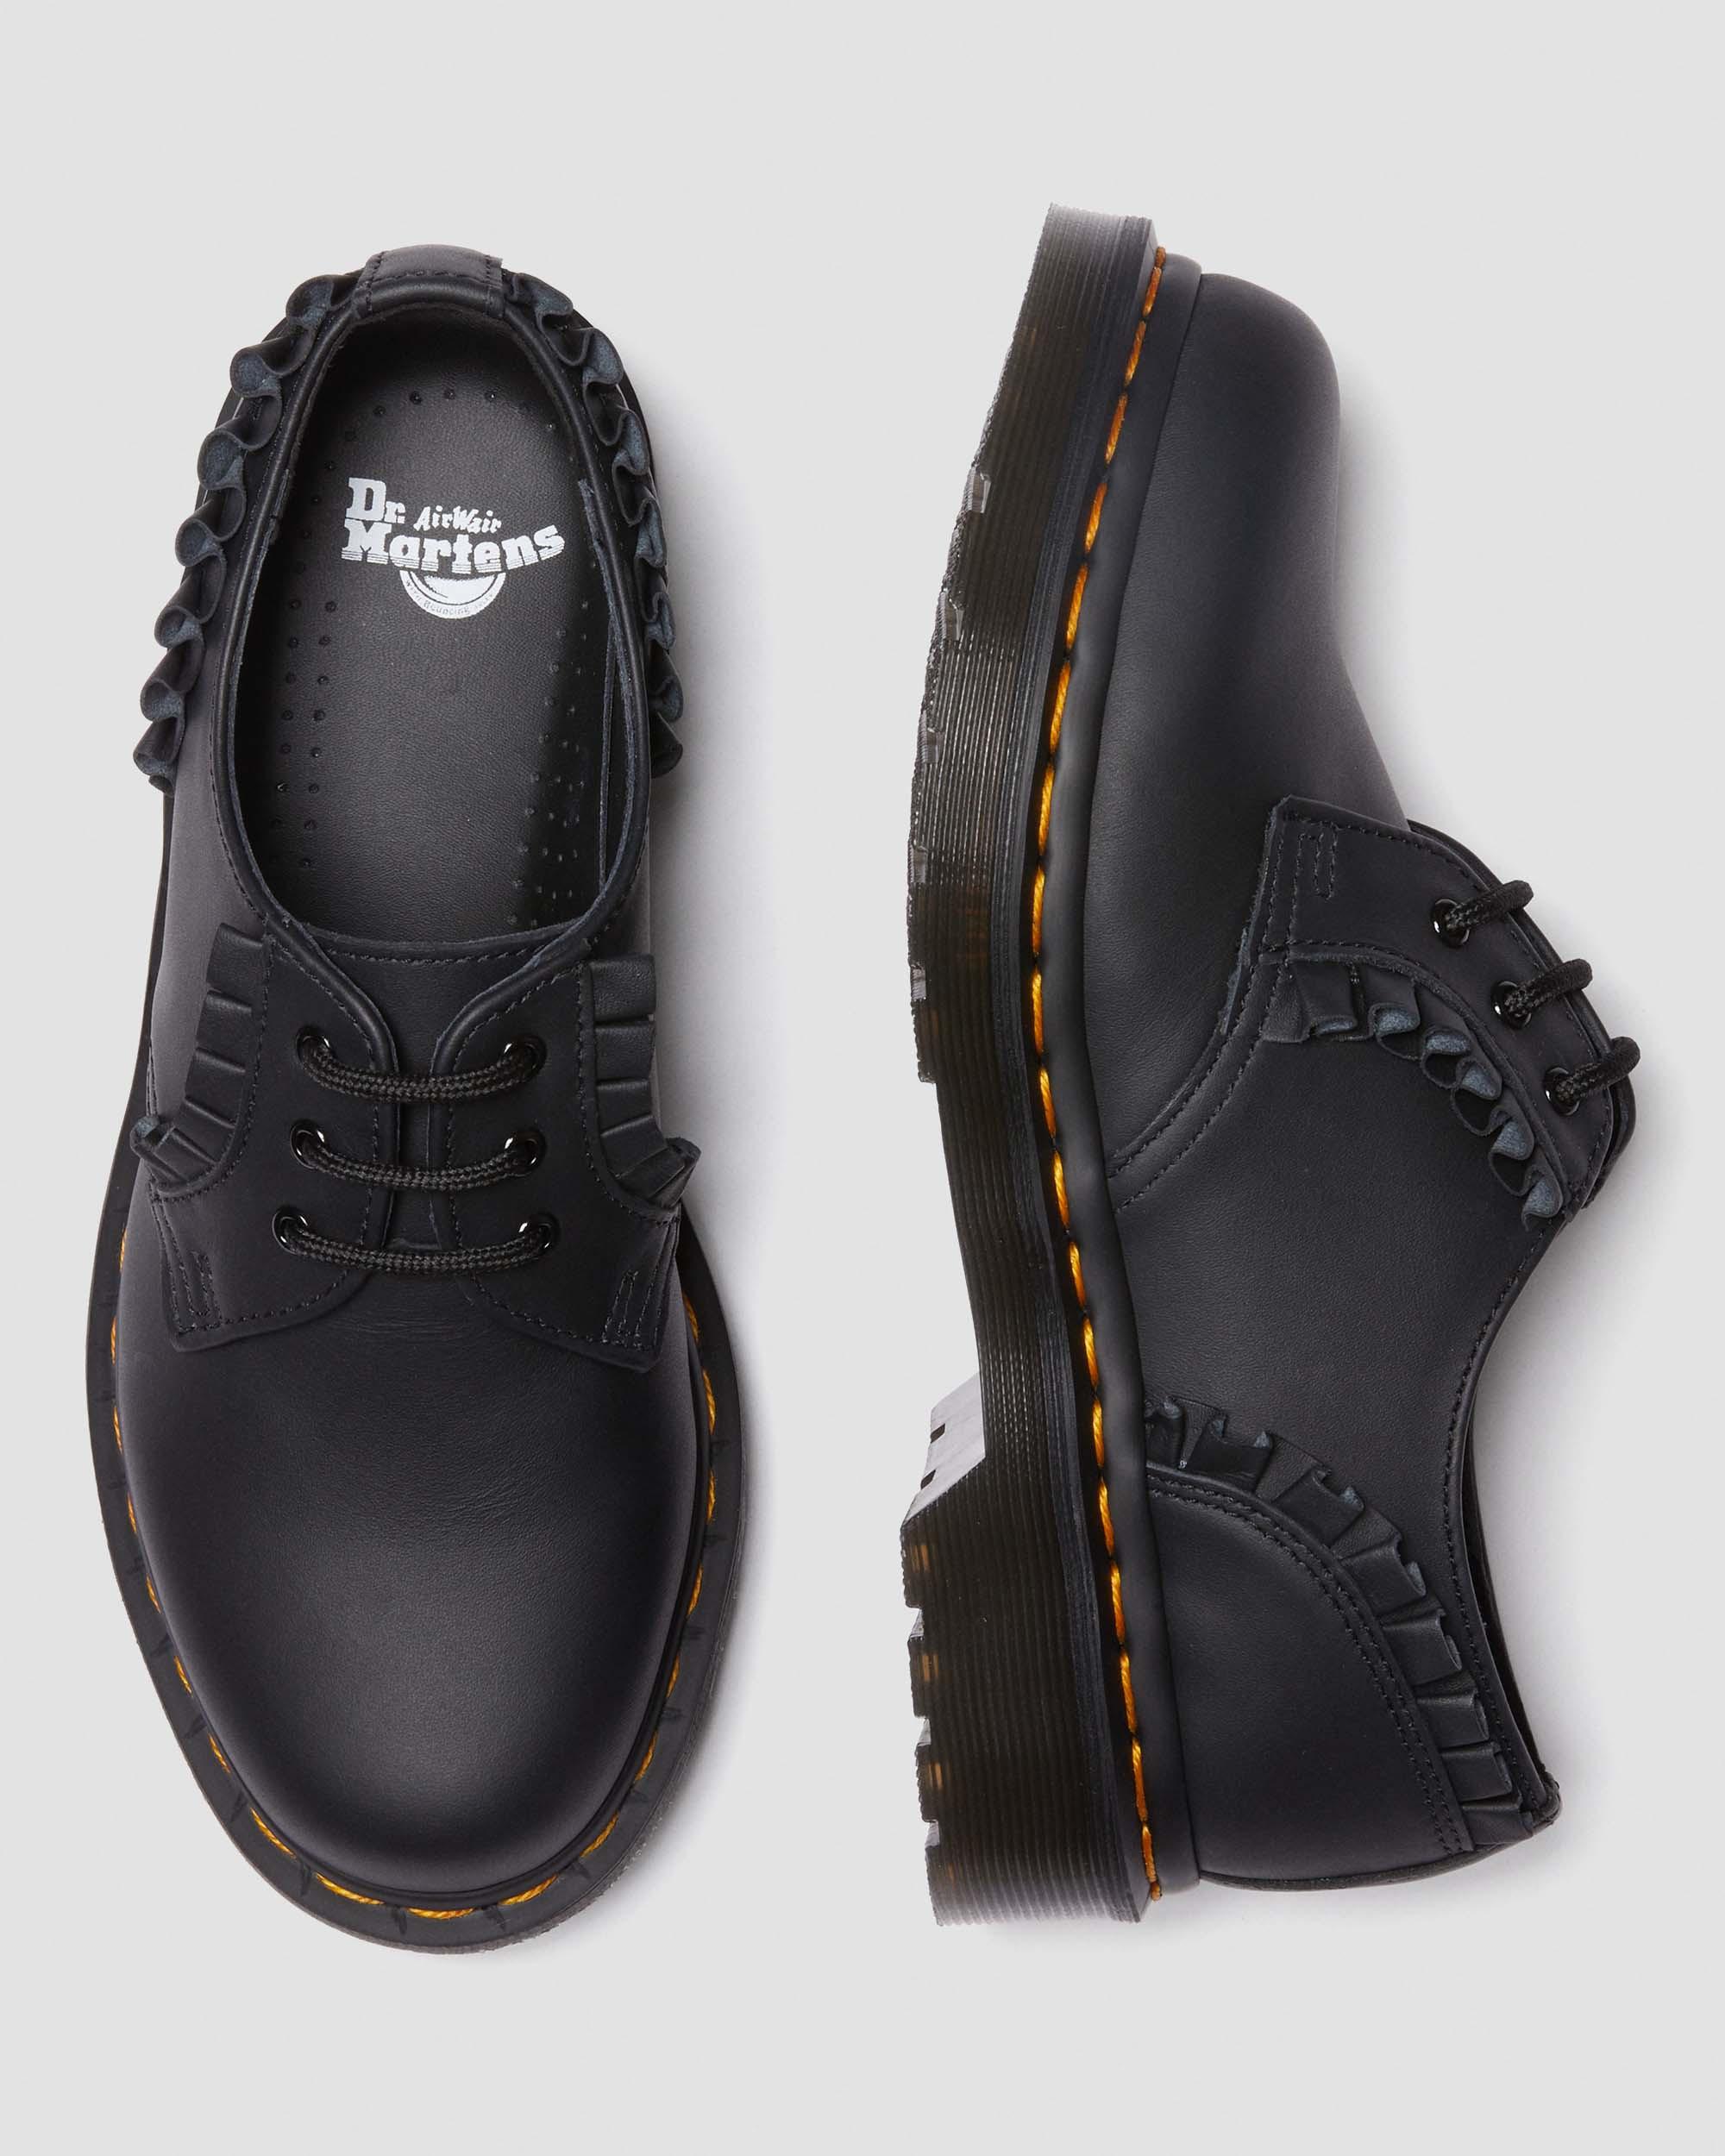 DR MARTENS 1461 Women's Frill Nappa Leather Oxford Shoes